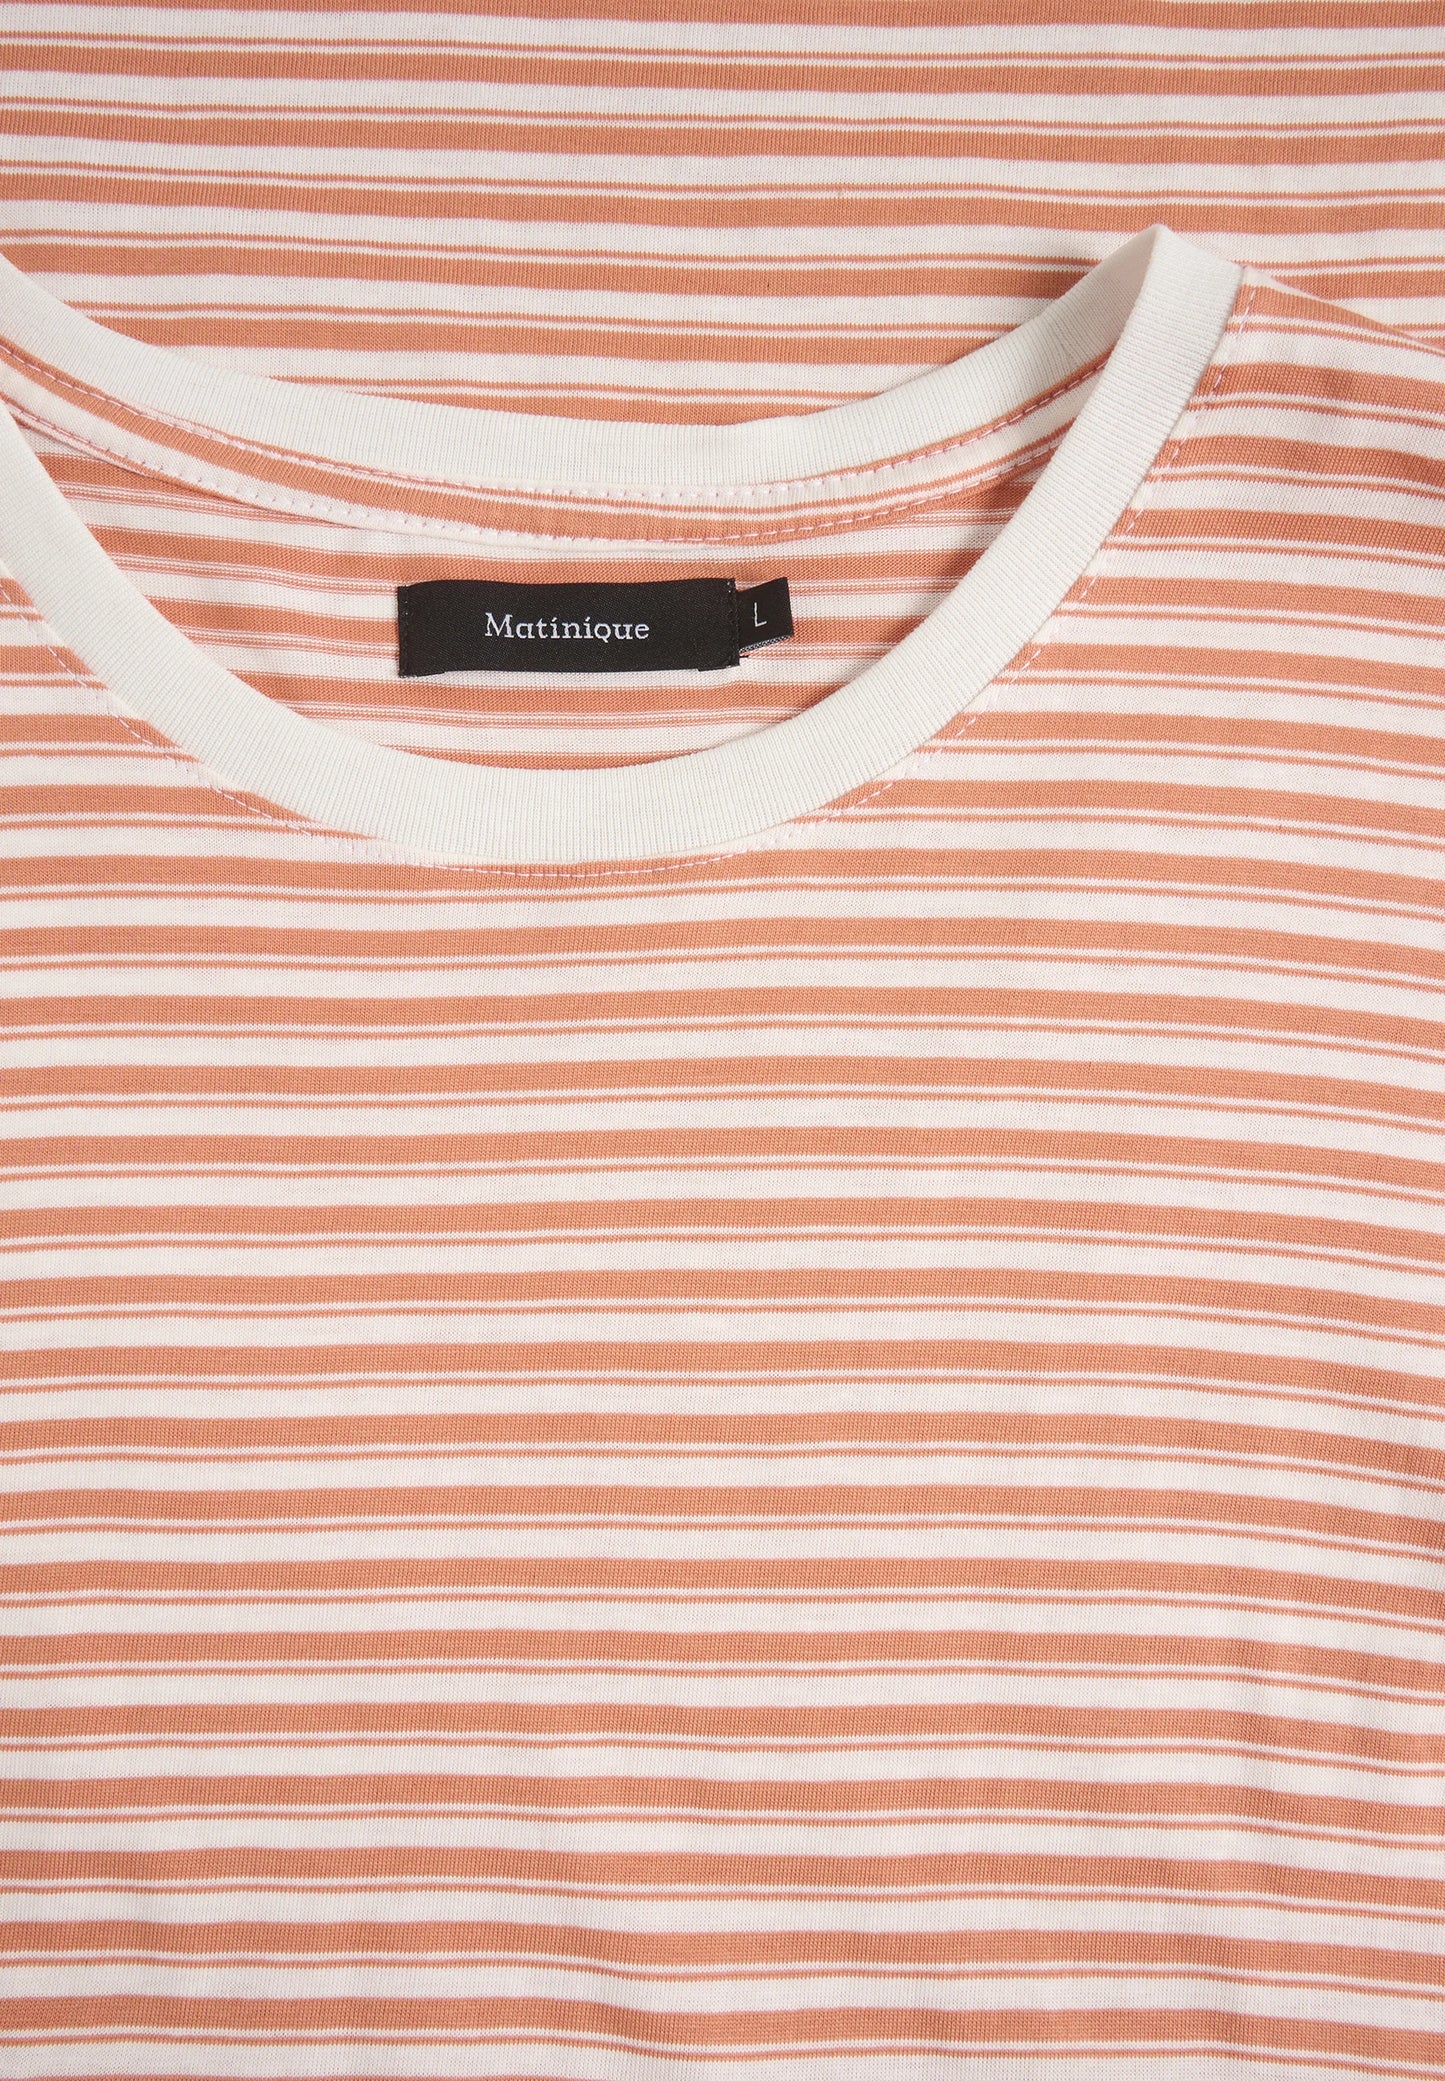 Matinique majermane t-shirt in coral gold